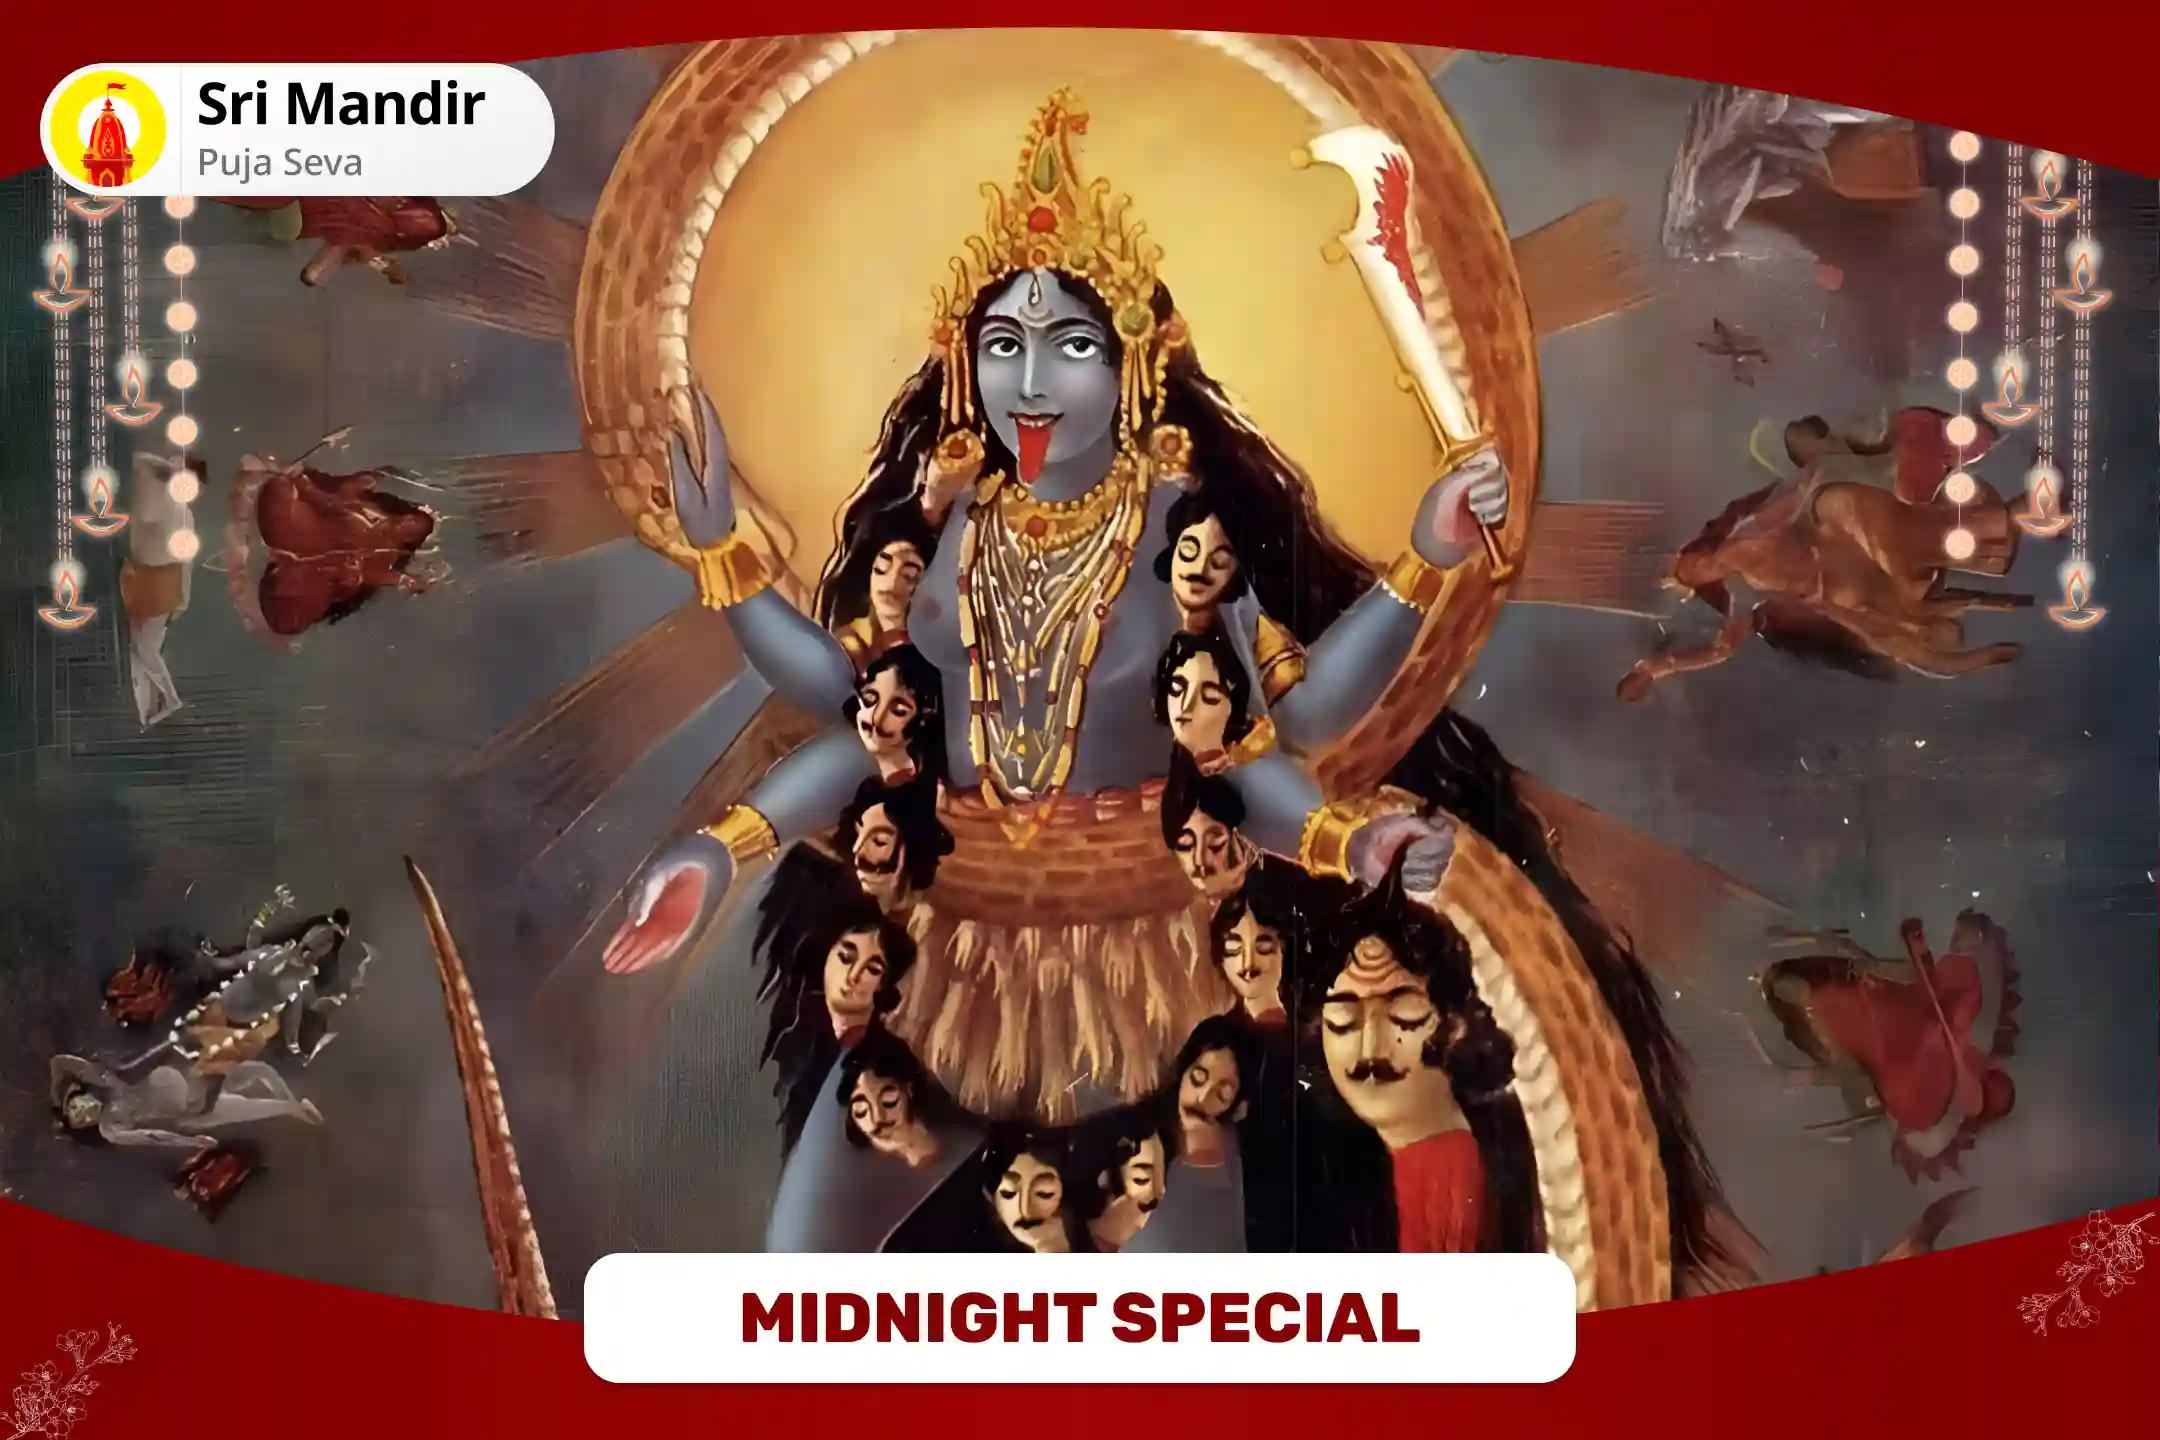 Midnight Special - Maa Kali Tantra Yukta Yagya for Protection against Negative Energies, Evil Forces and Protection from Fear